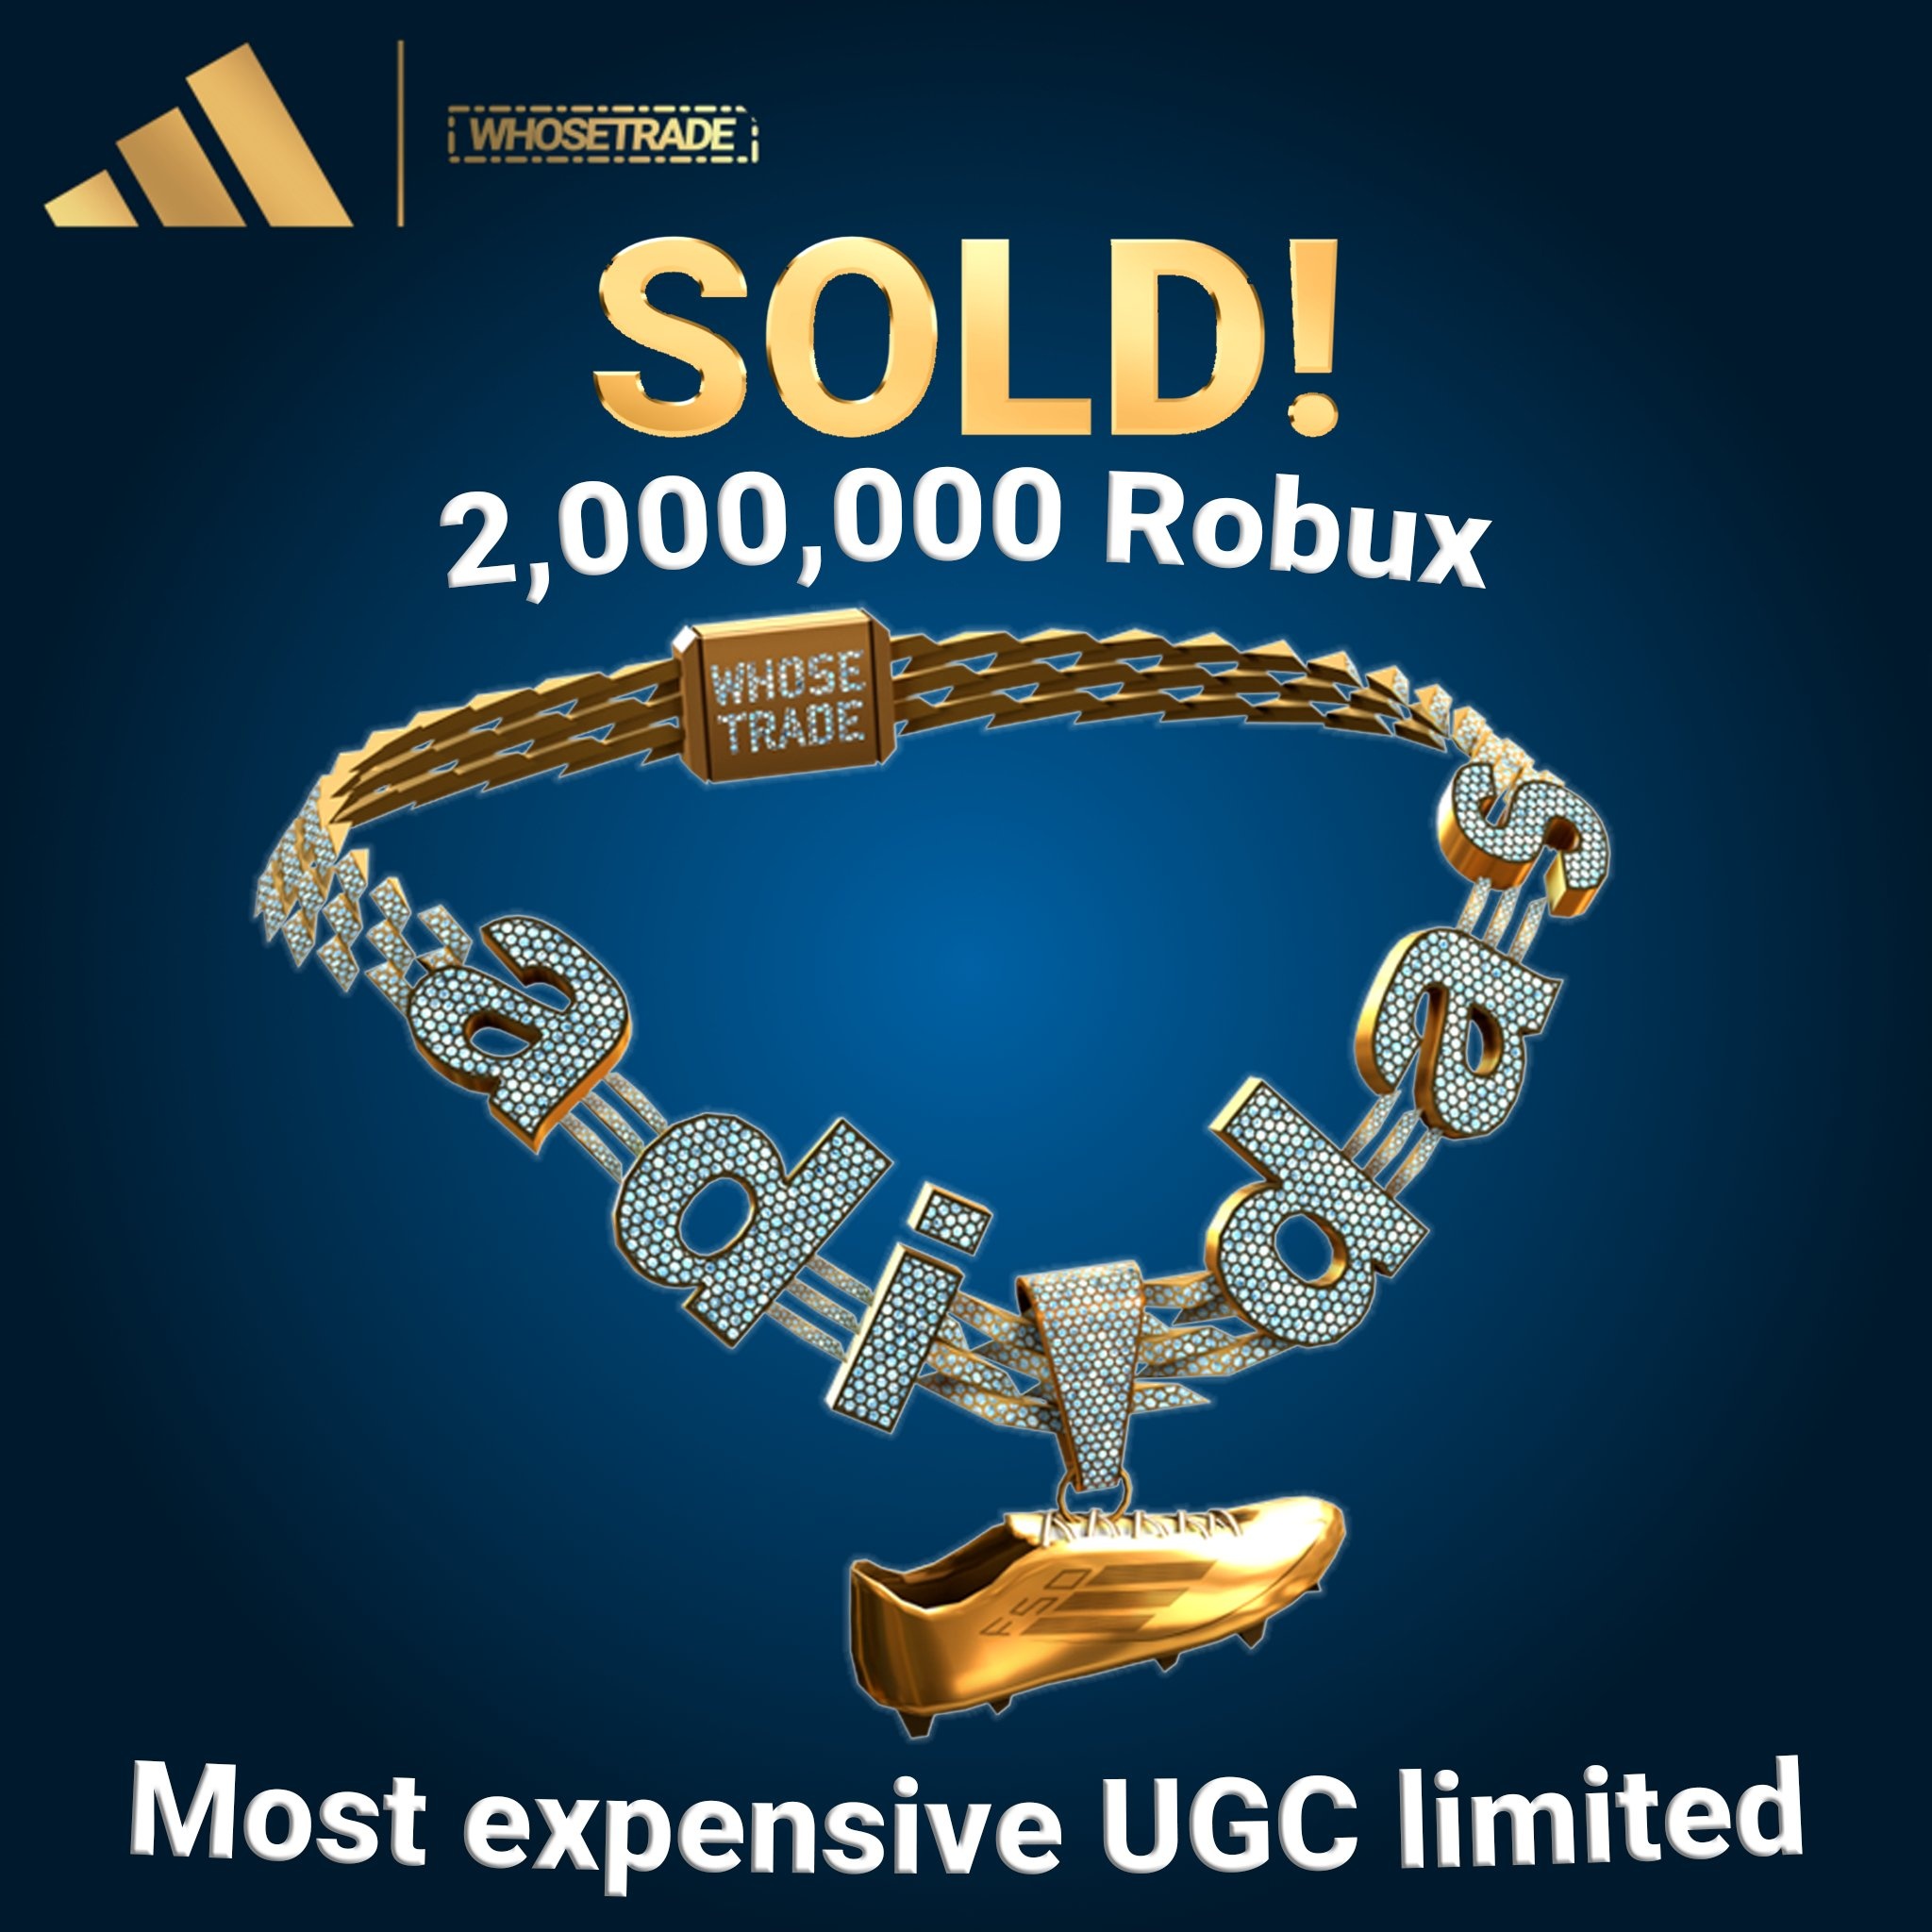 Adidas has sold the most expensive UGC item in Roblox. Image: X